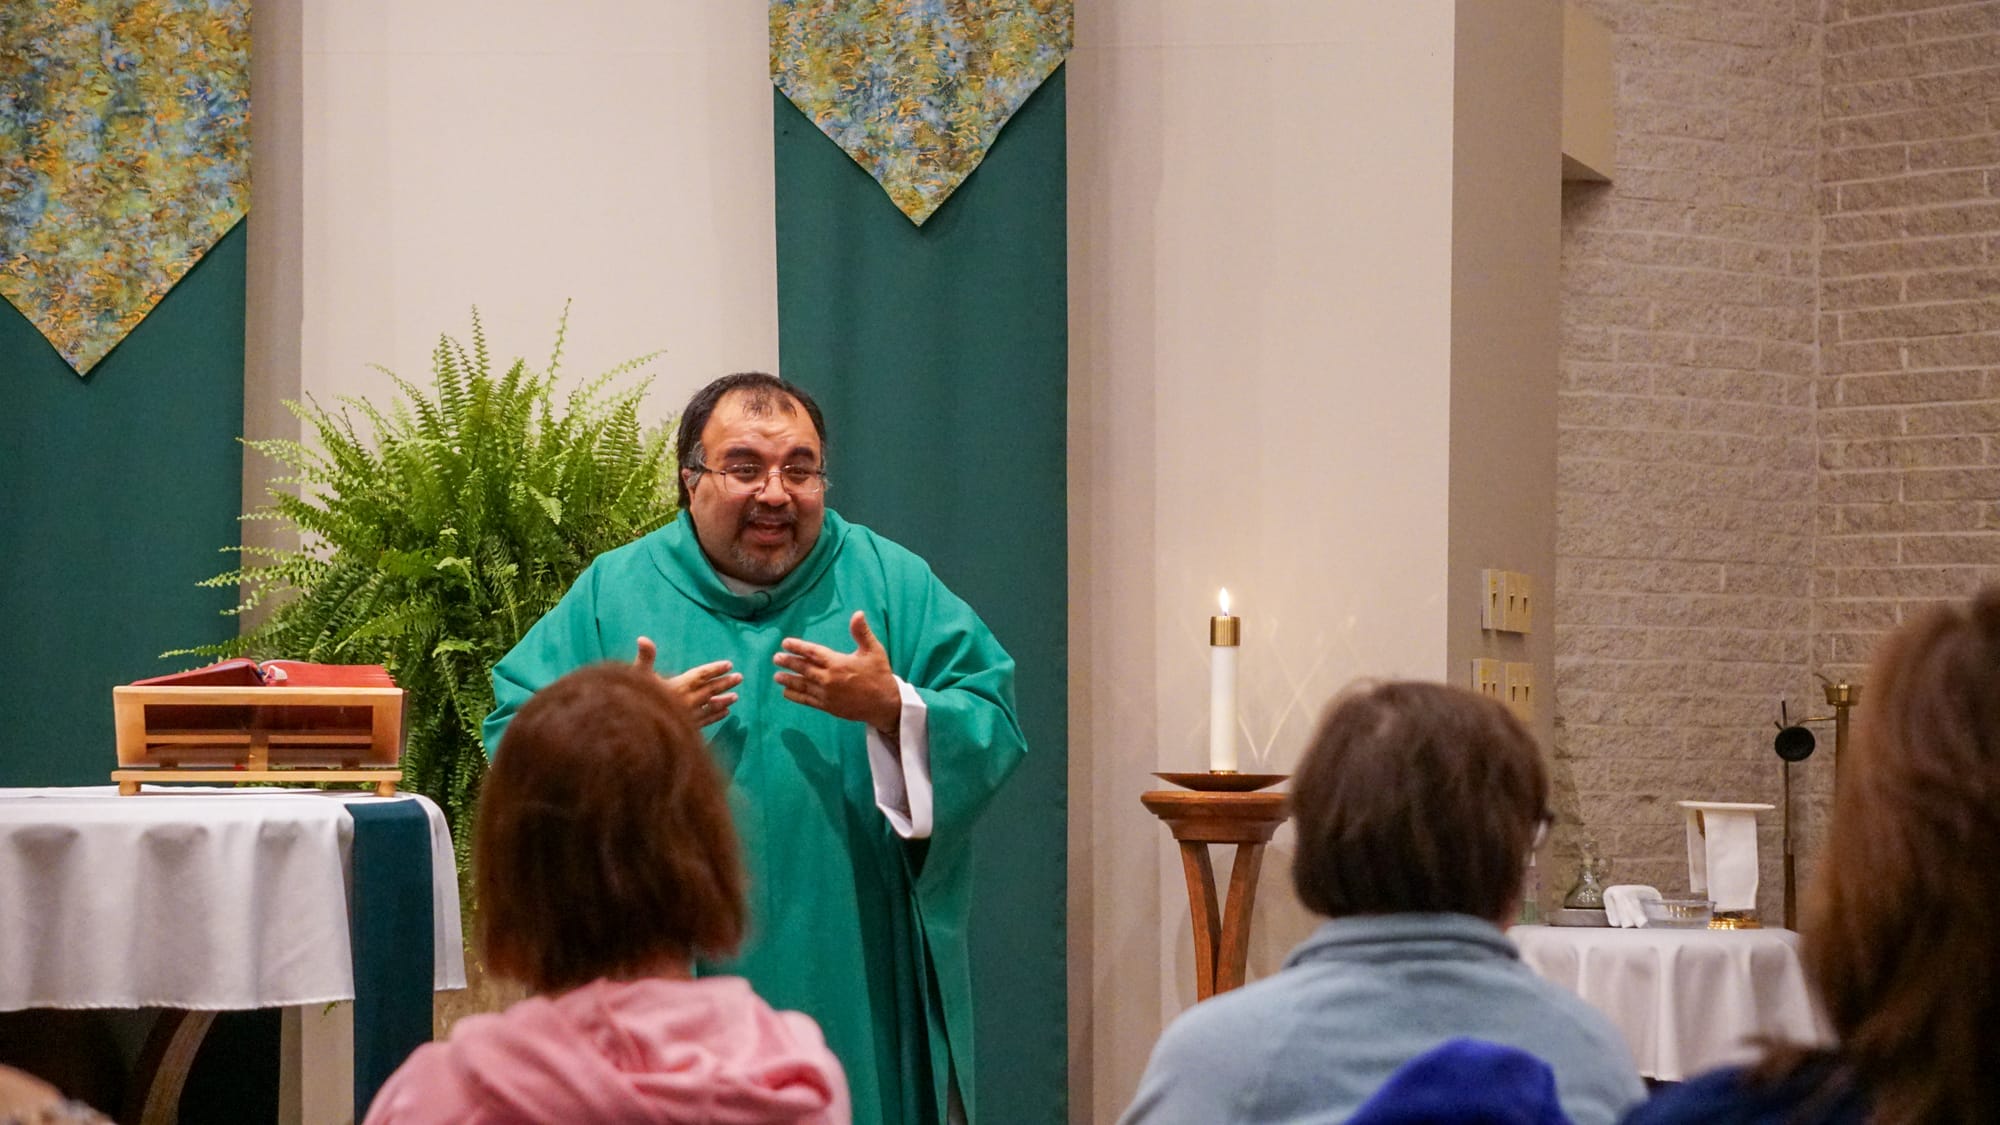 Fr. Vito, in green vestments, smiles while addressing the congregation as he delivers his homily.